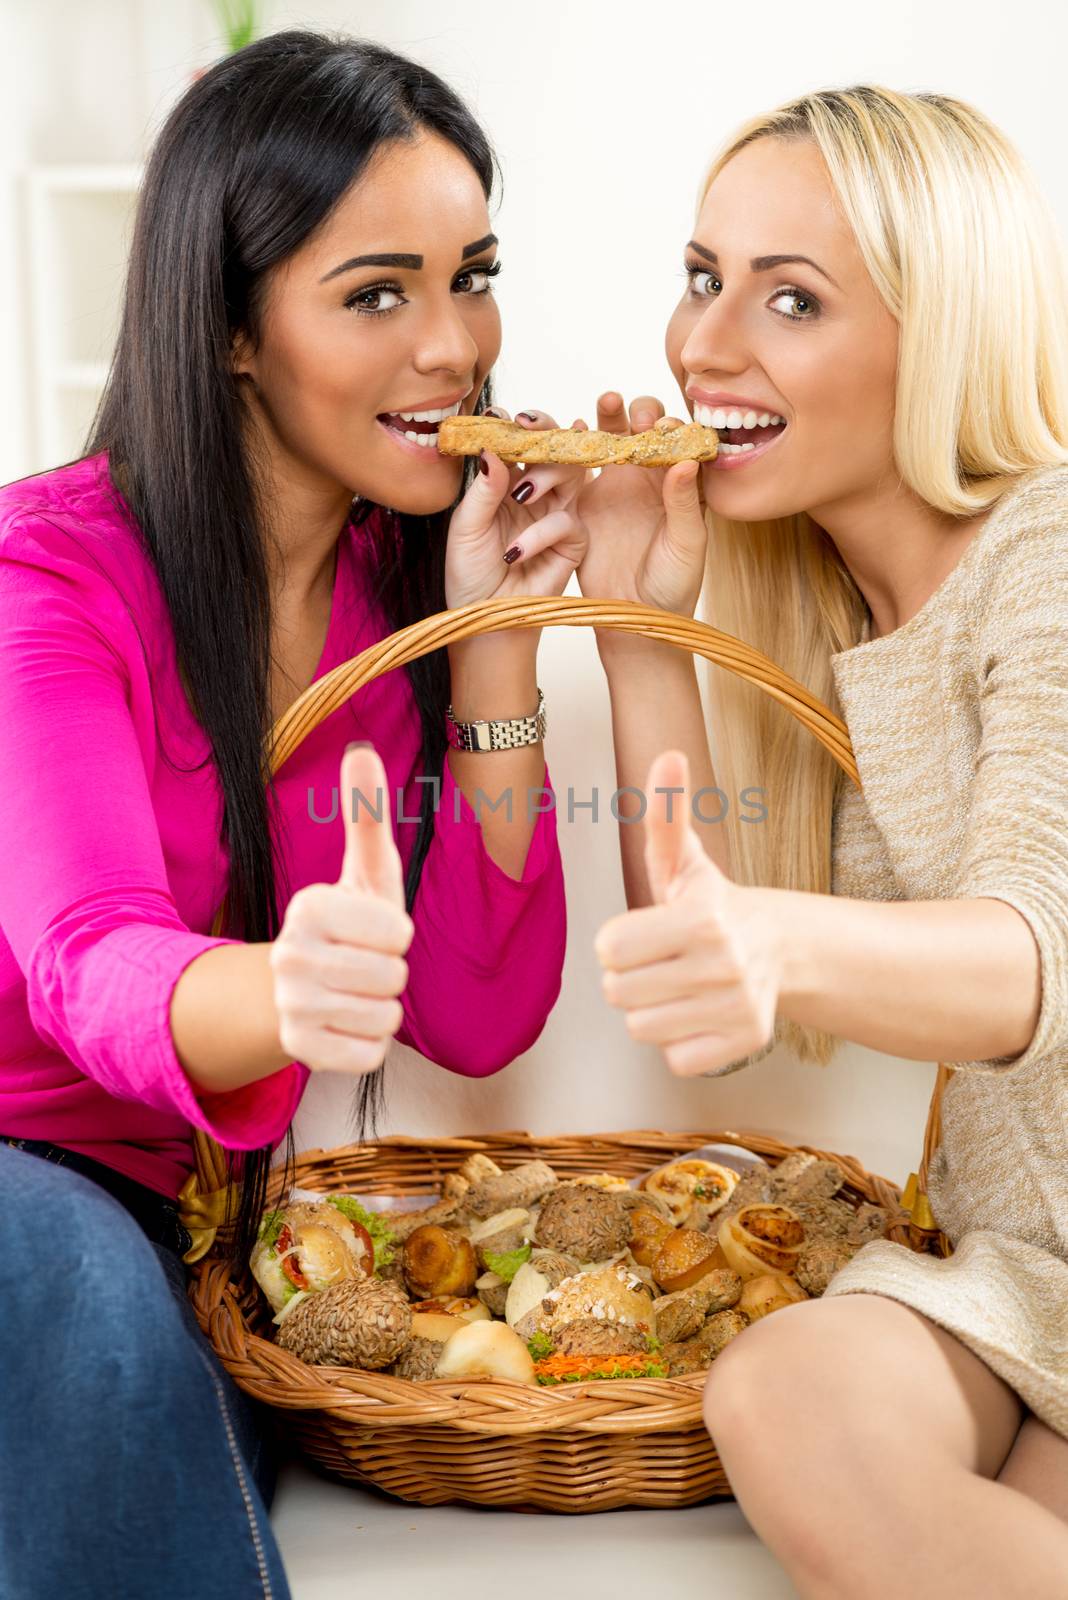 Brunette and blonde girl are sitting on the couch, raised their thumbs and looking at the camera with her mouth open about to bite a piece of pastry each with its end. Among them is woven basket with pastries.